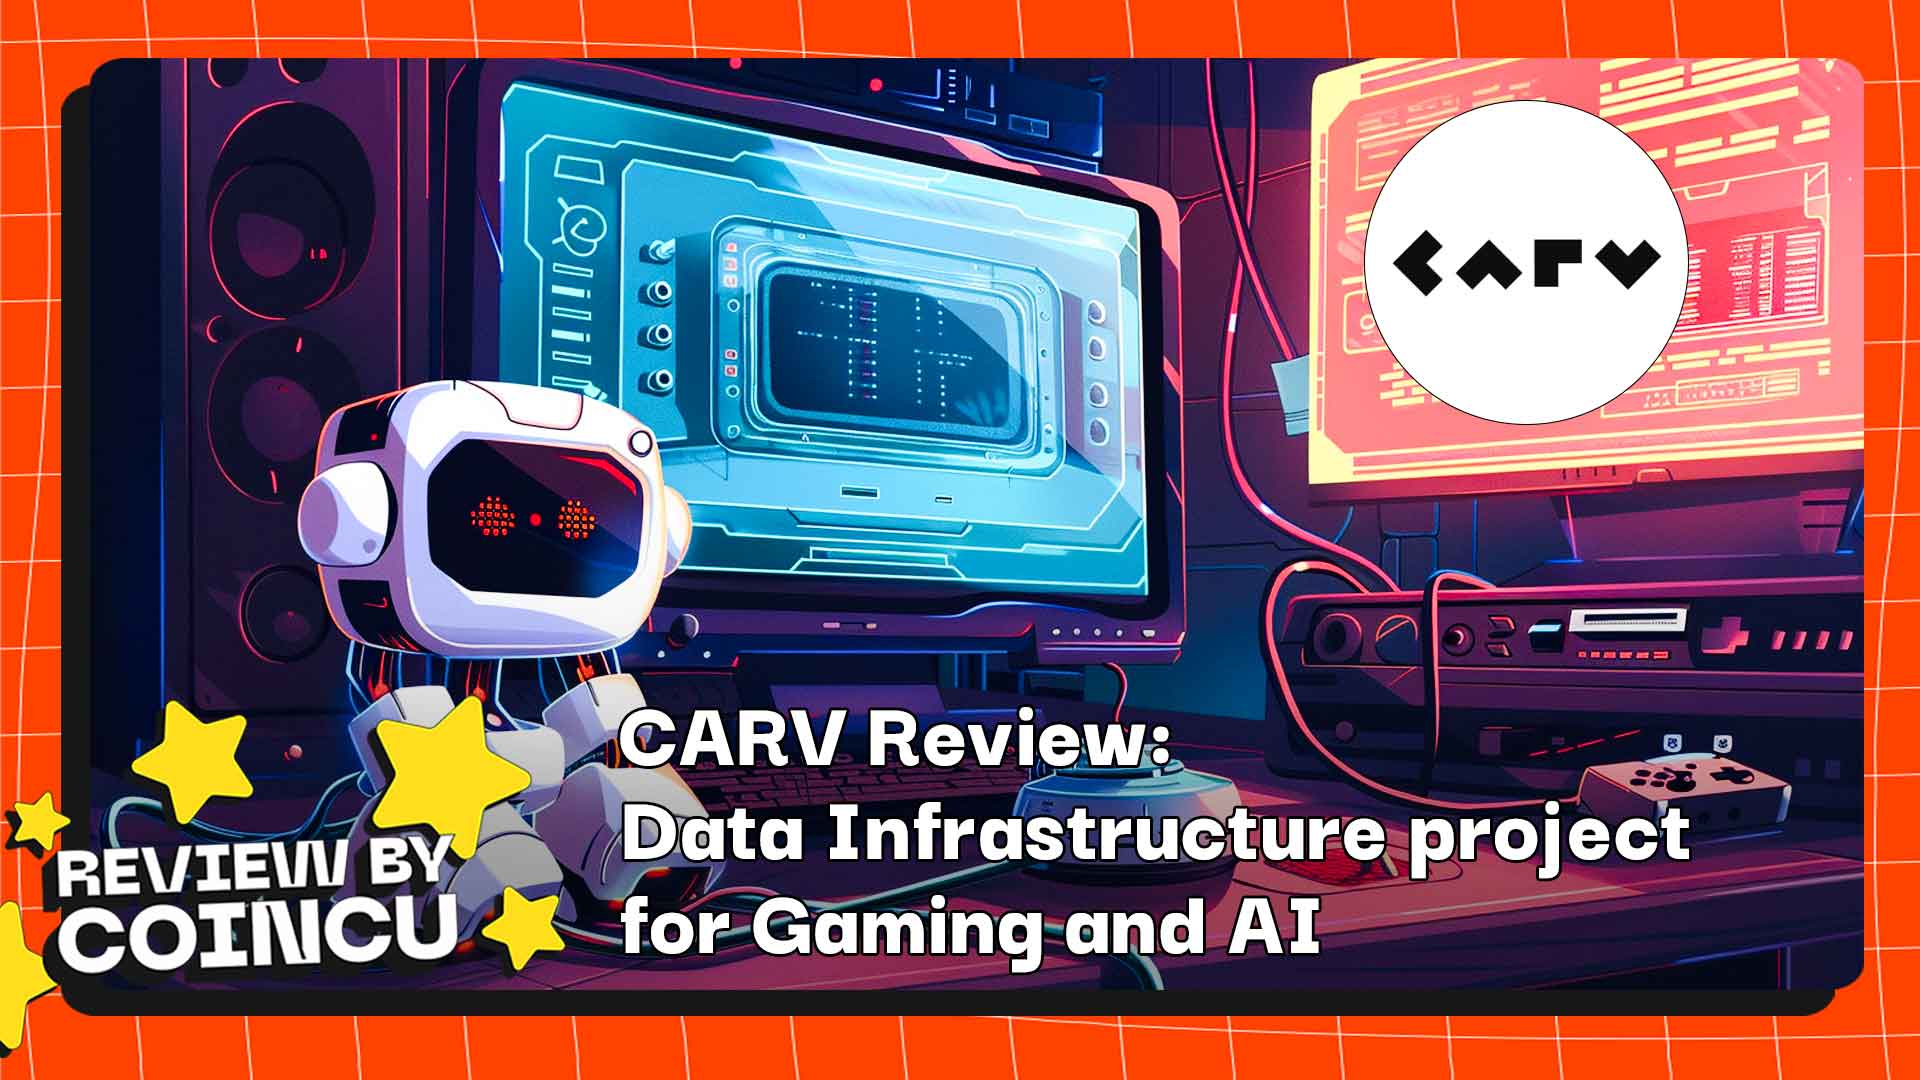 CARV Review: Data Infrastructure project for Gaming and AI